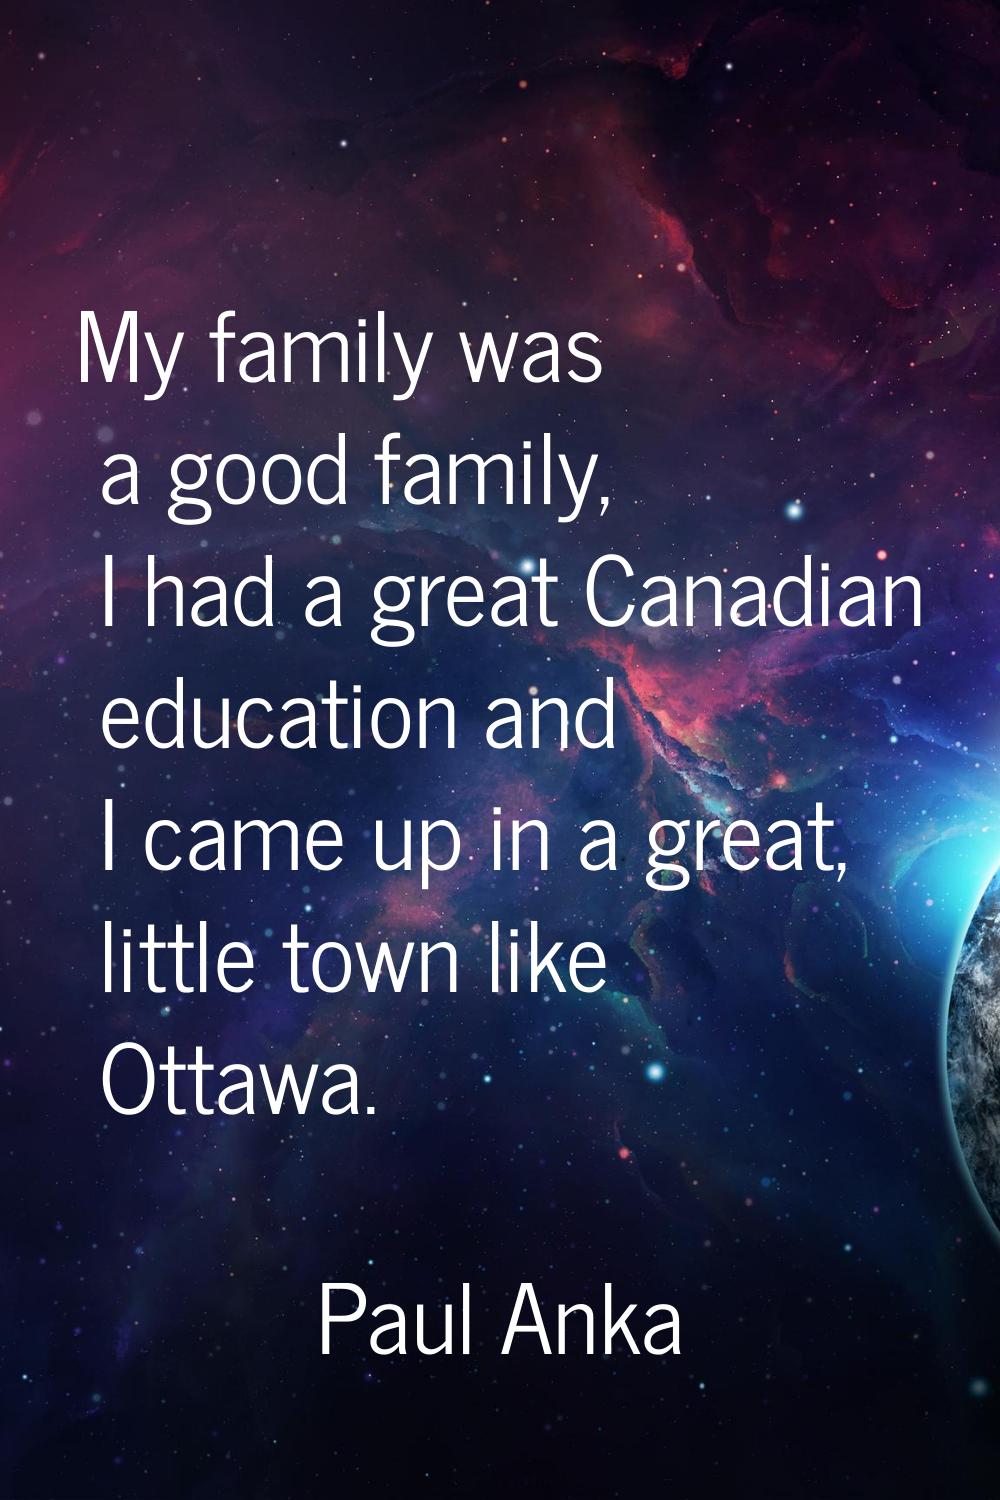 My family was a good family, I had a great Canadian education and I came up in a great, little town